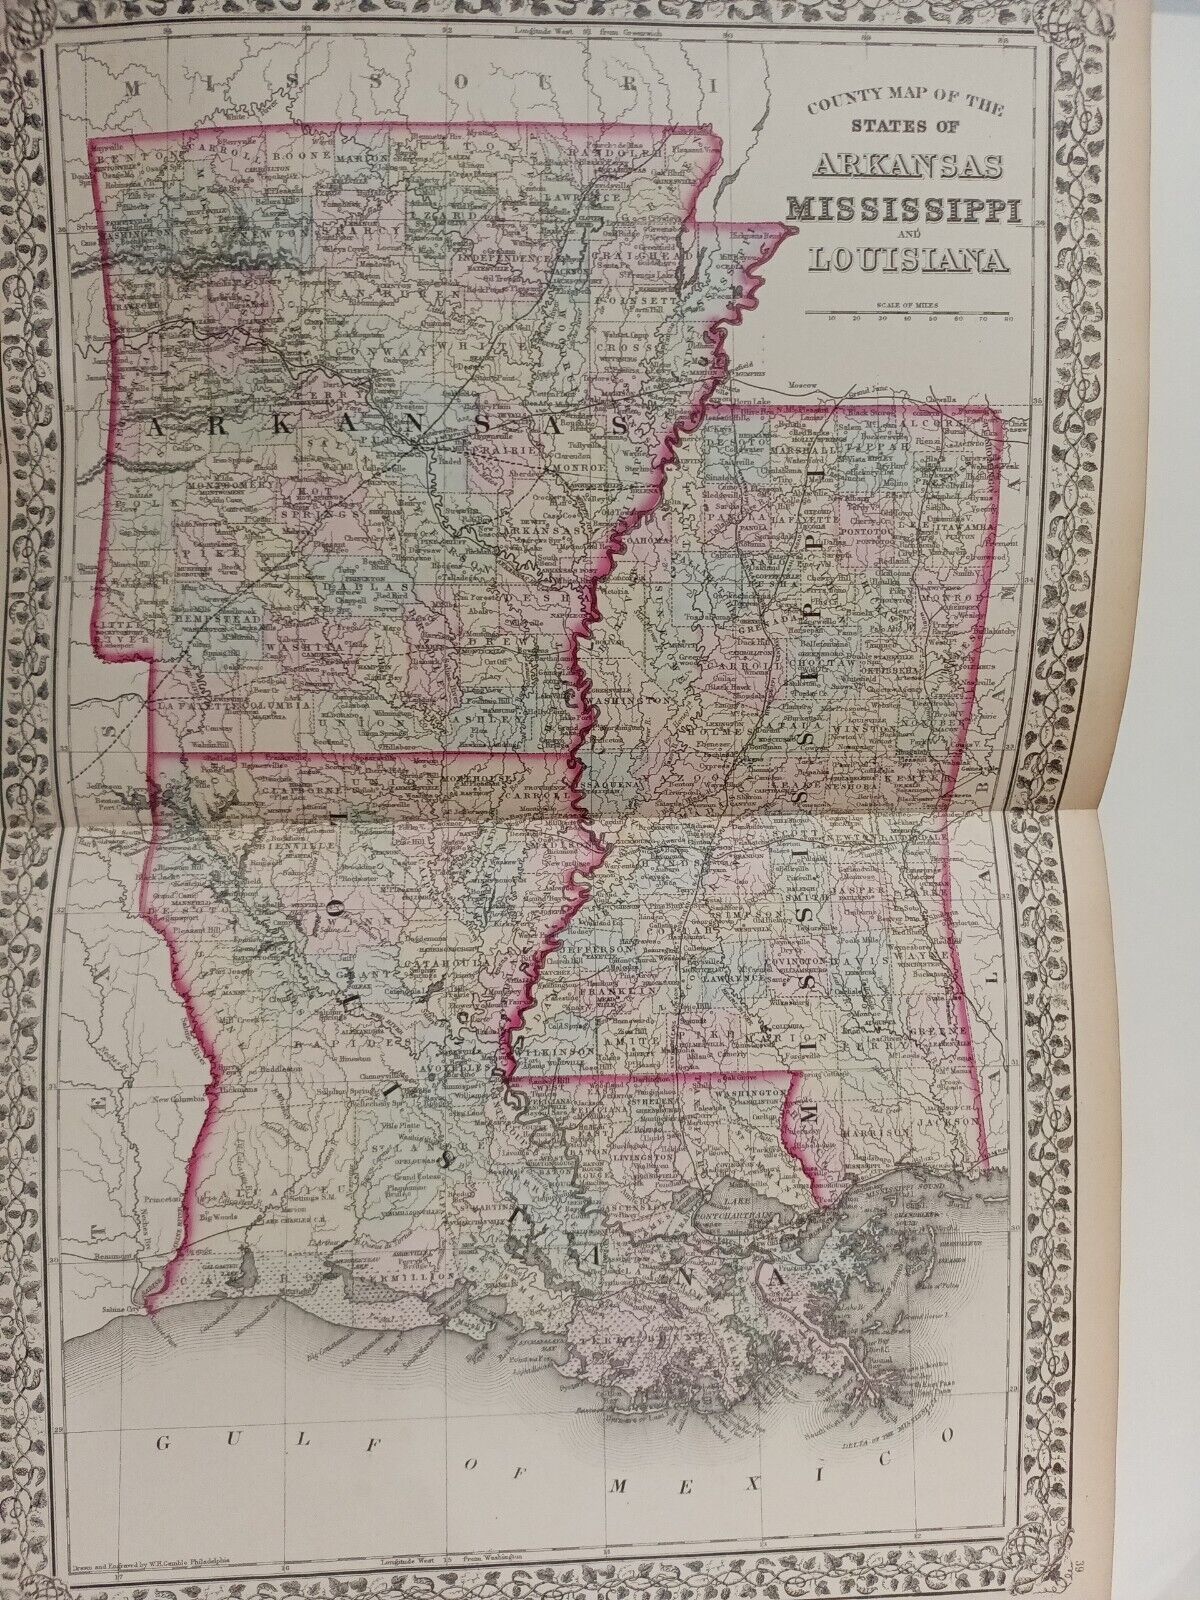 1873 Mitchell\'s Map of Arkansas, Mississippi, Louisiana, Authentic Hand-Colored